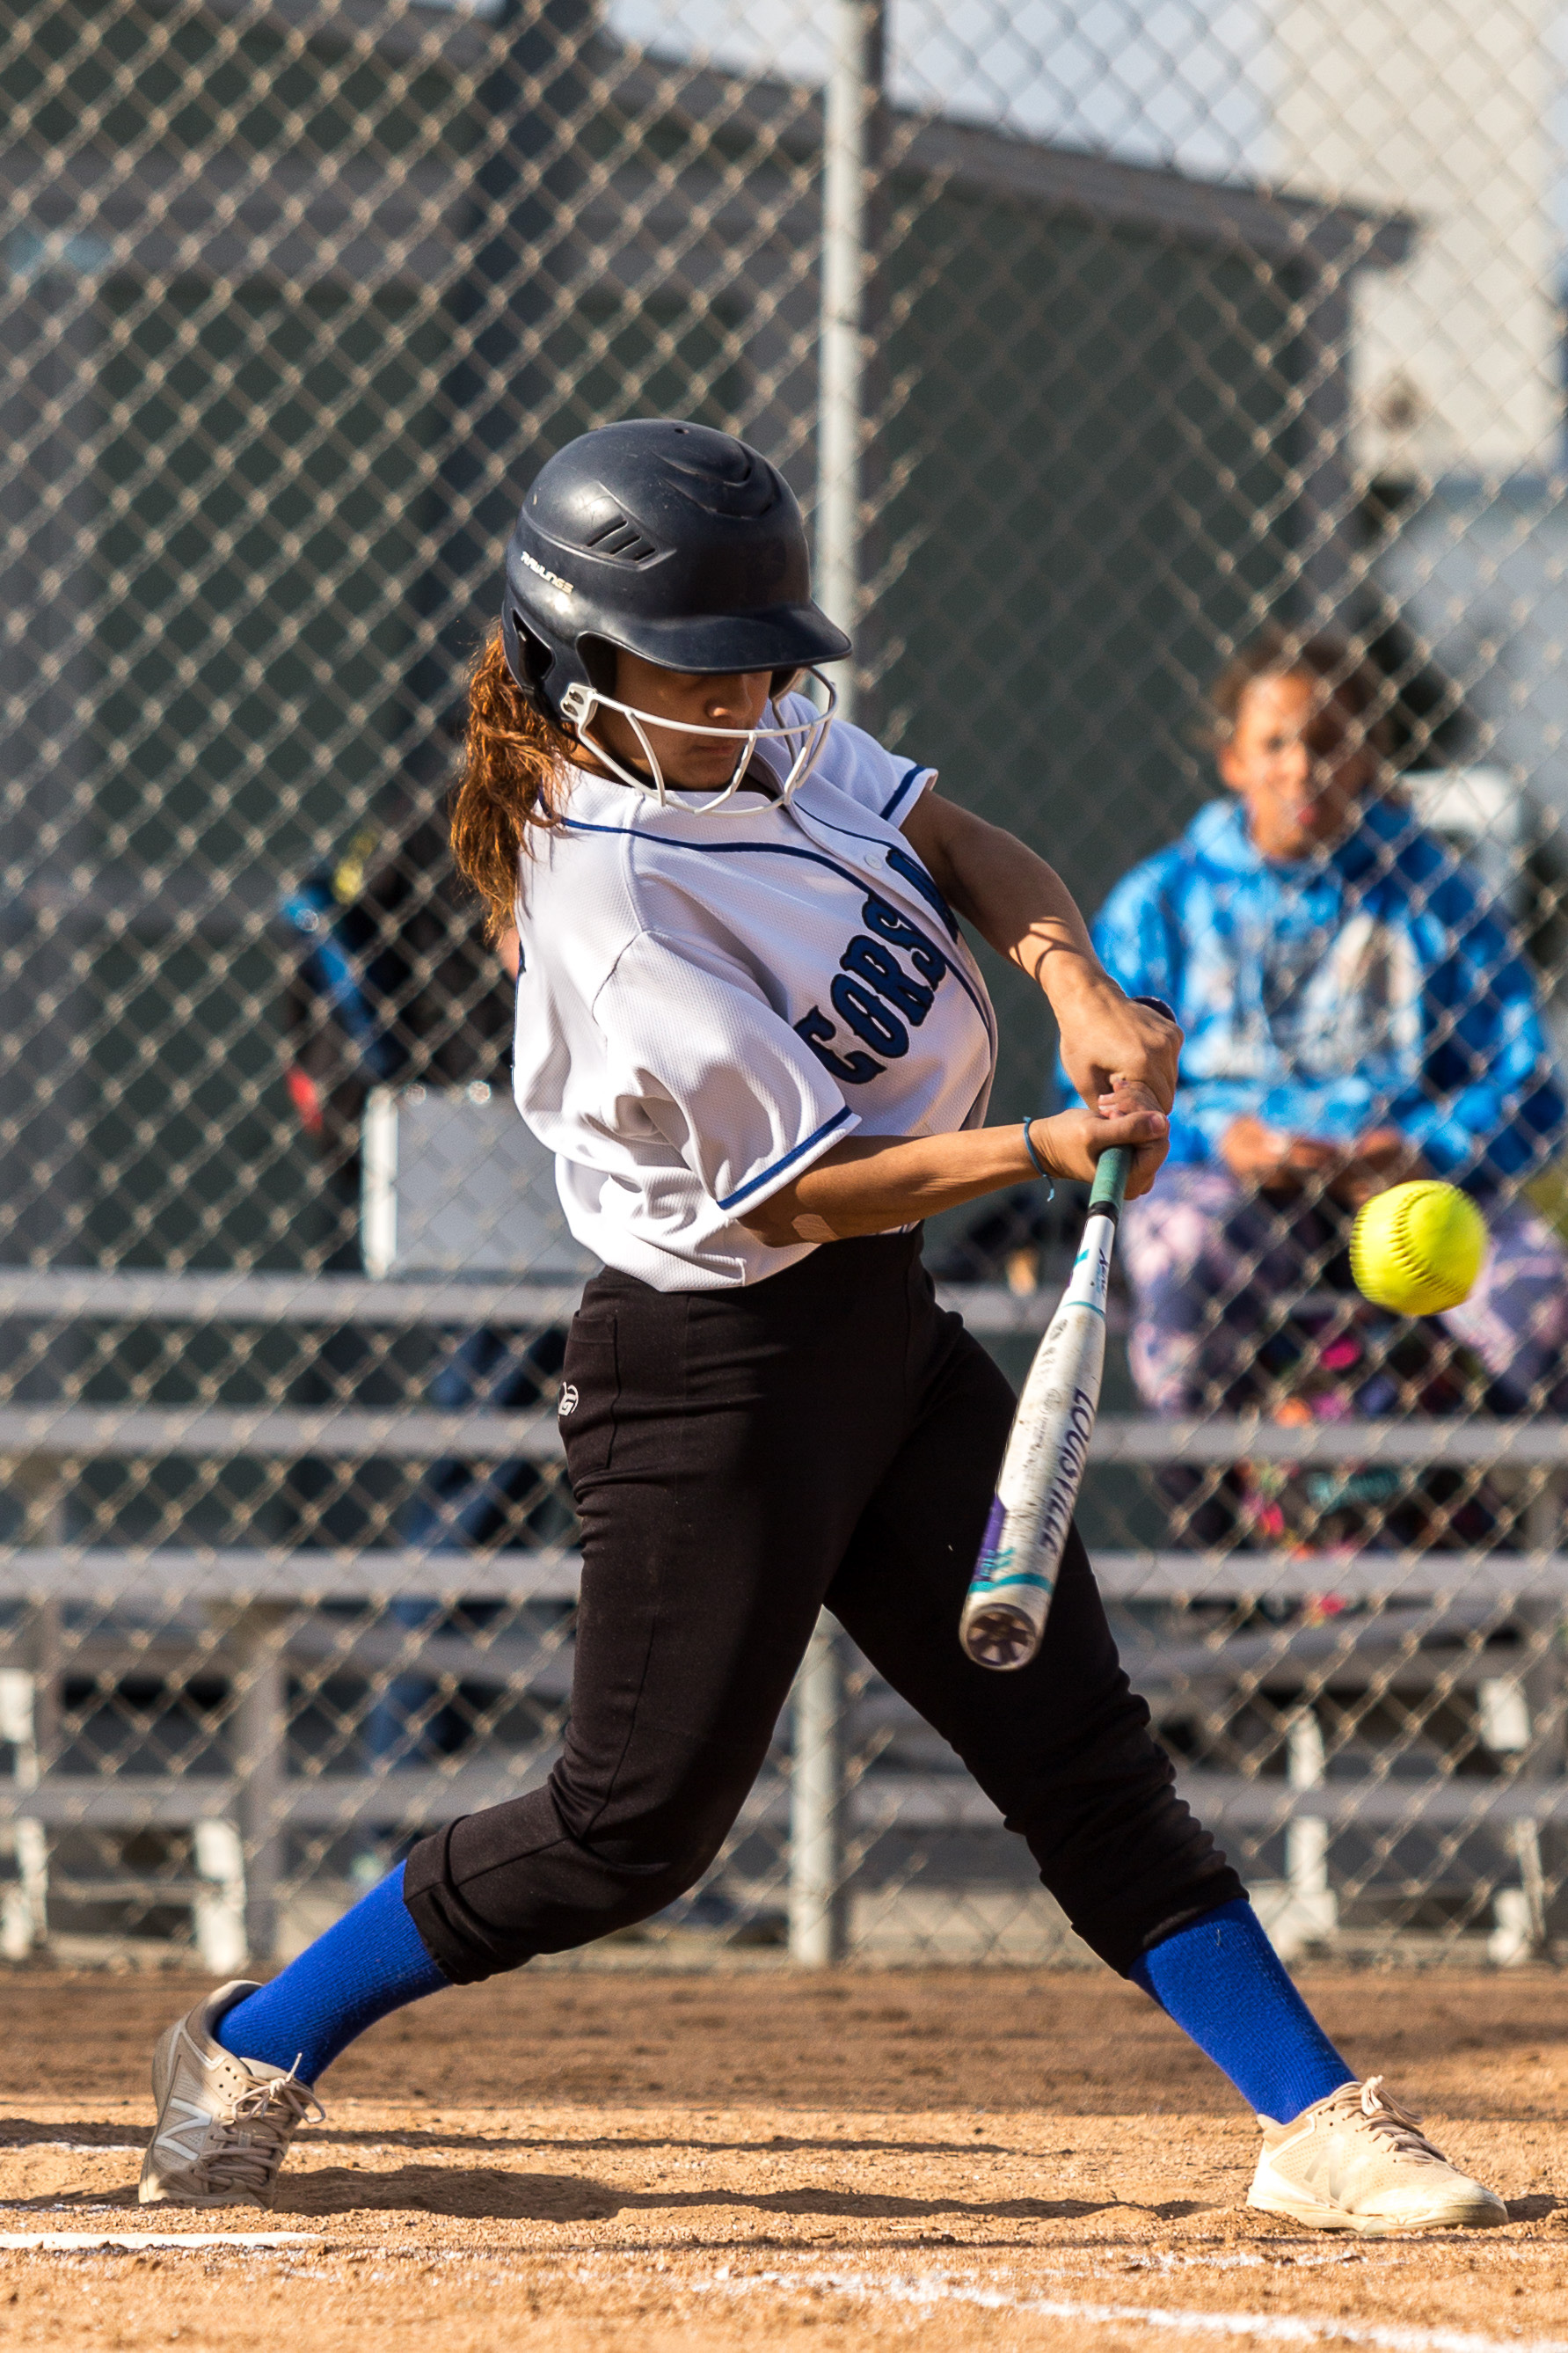  Santa Monica College Corsair freshman infielder Taylor Liebesman #23 (left, white) pitches a curve ball during the bottom of the 4th at the Corsair Field in Santa Monica California, on Tuesday, February 27 2018. The Corsairs would go on to lose the 